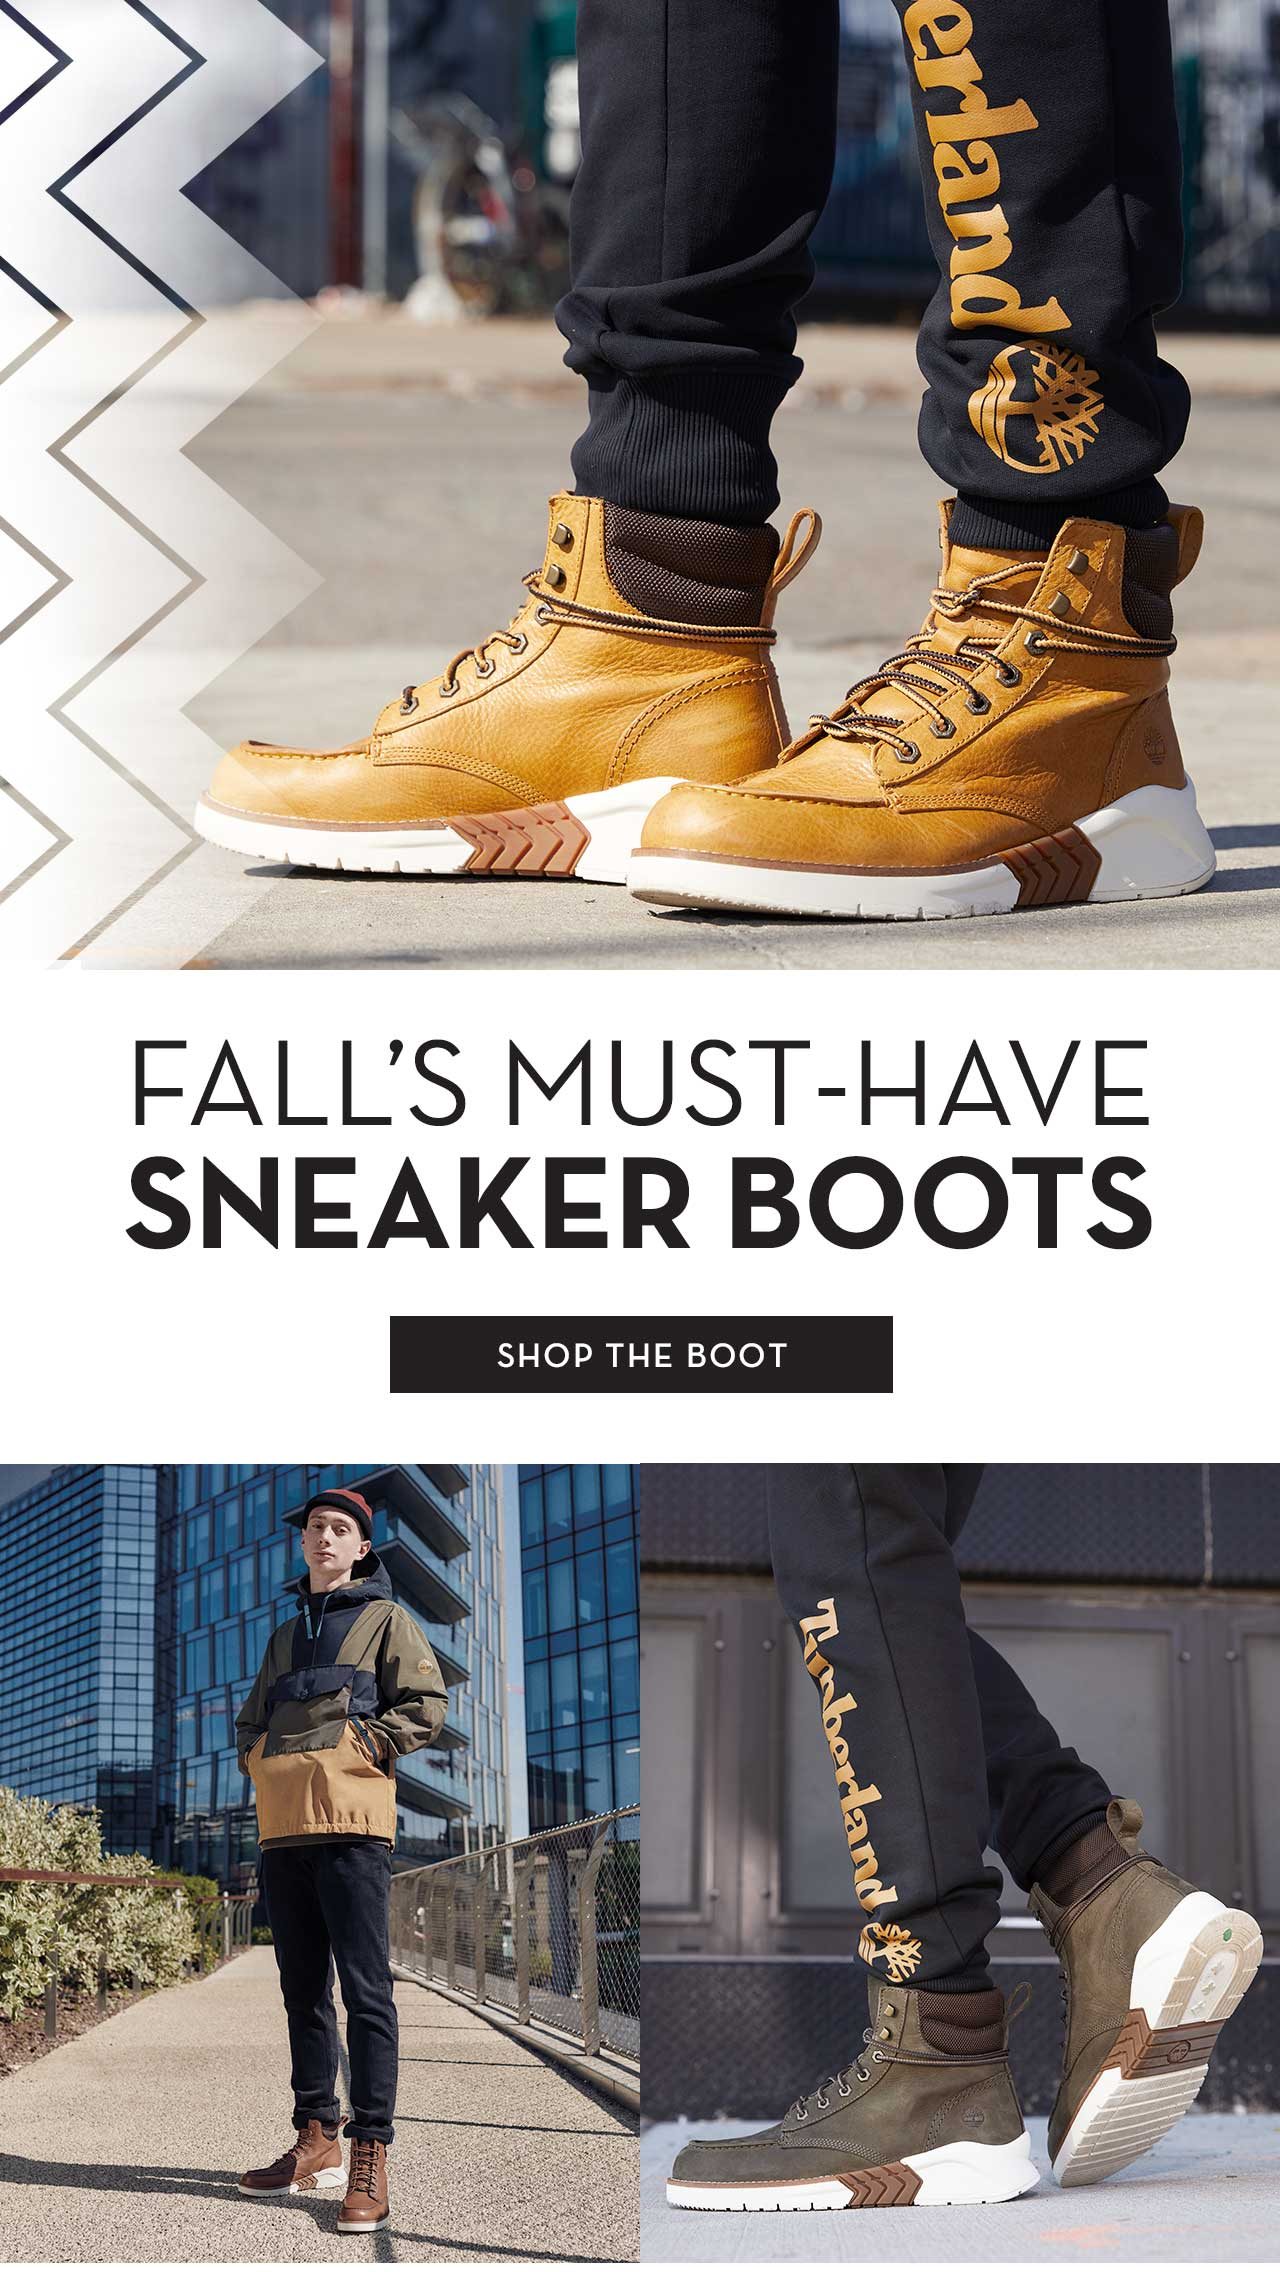 Vet Nuchter doel New men's sneaker boots for fall. - Timberland Email Archive